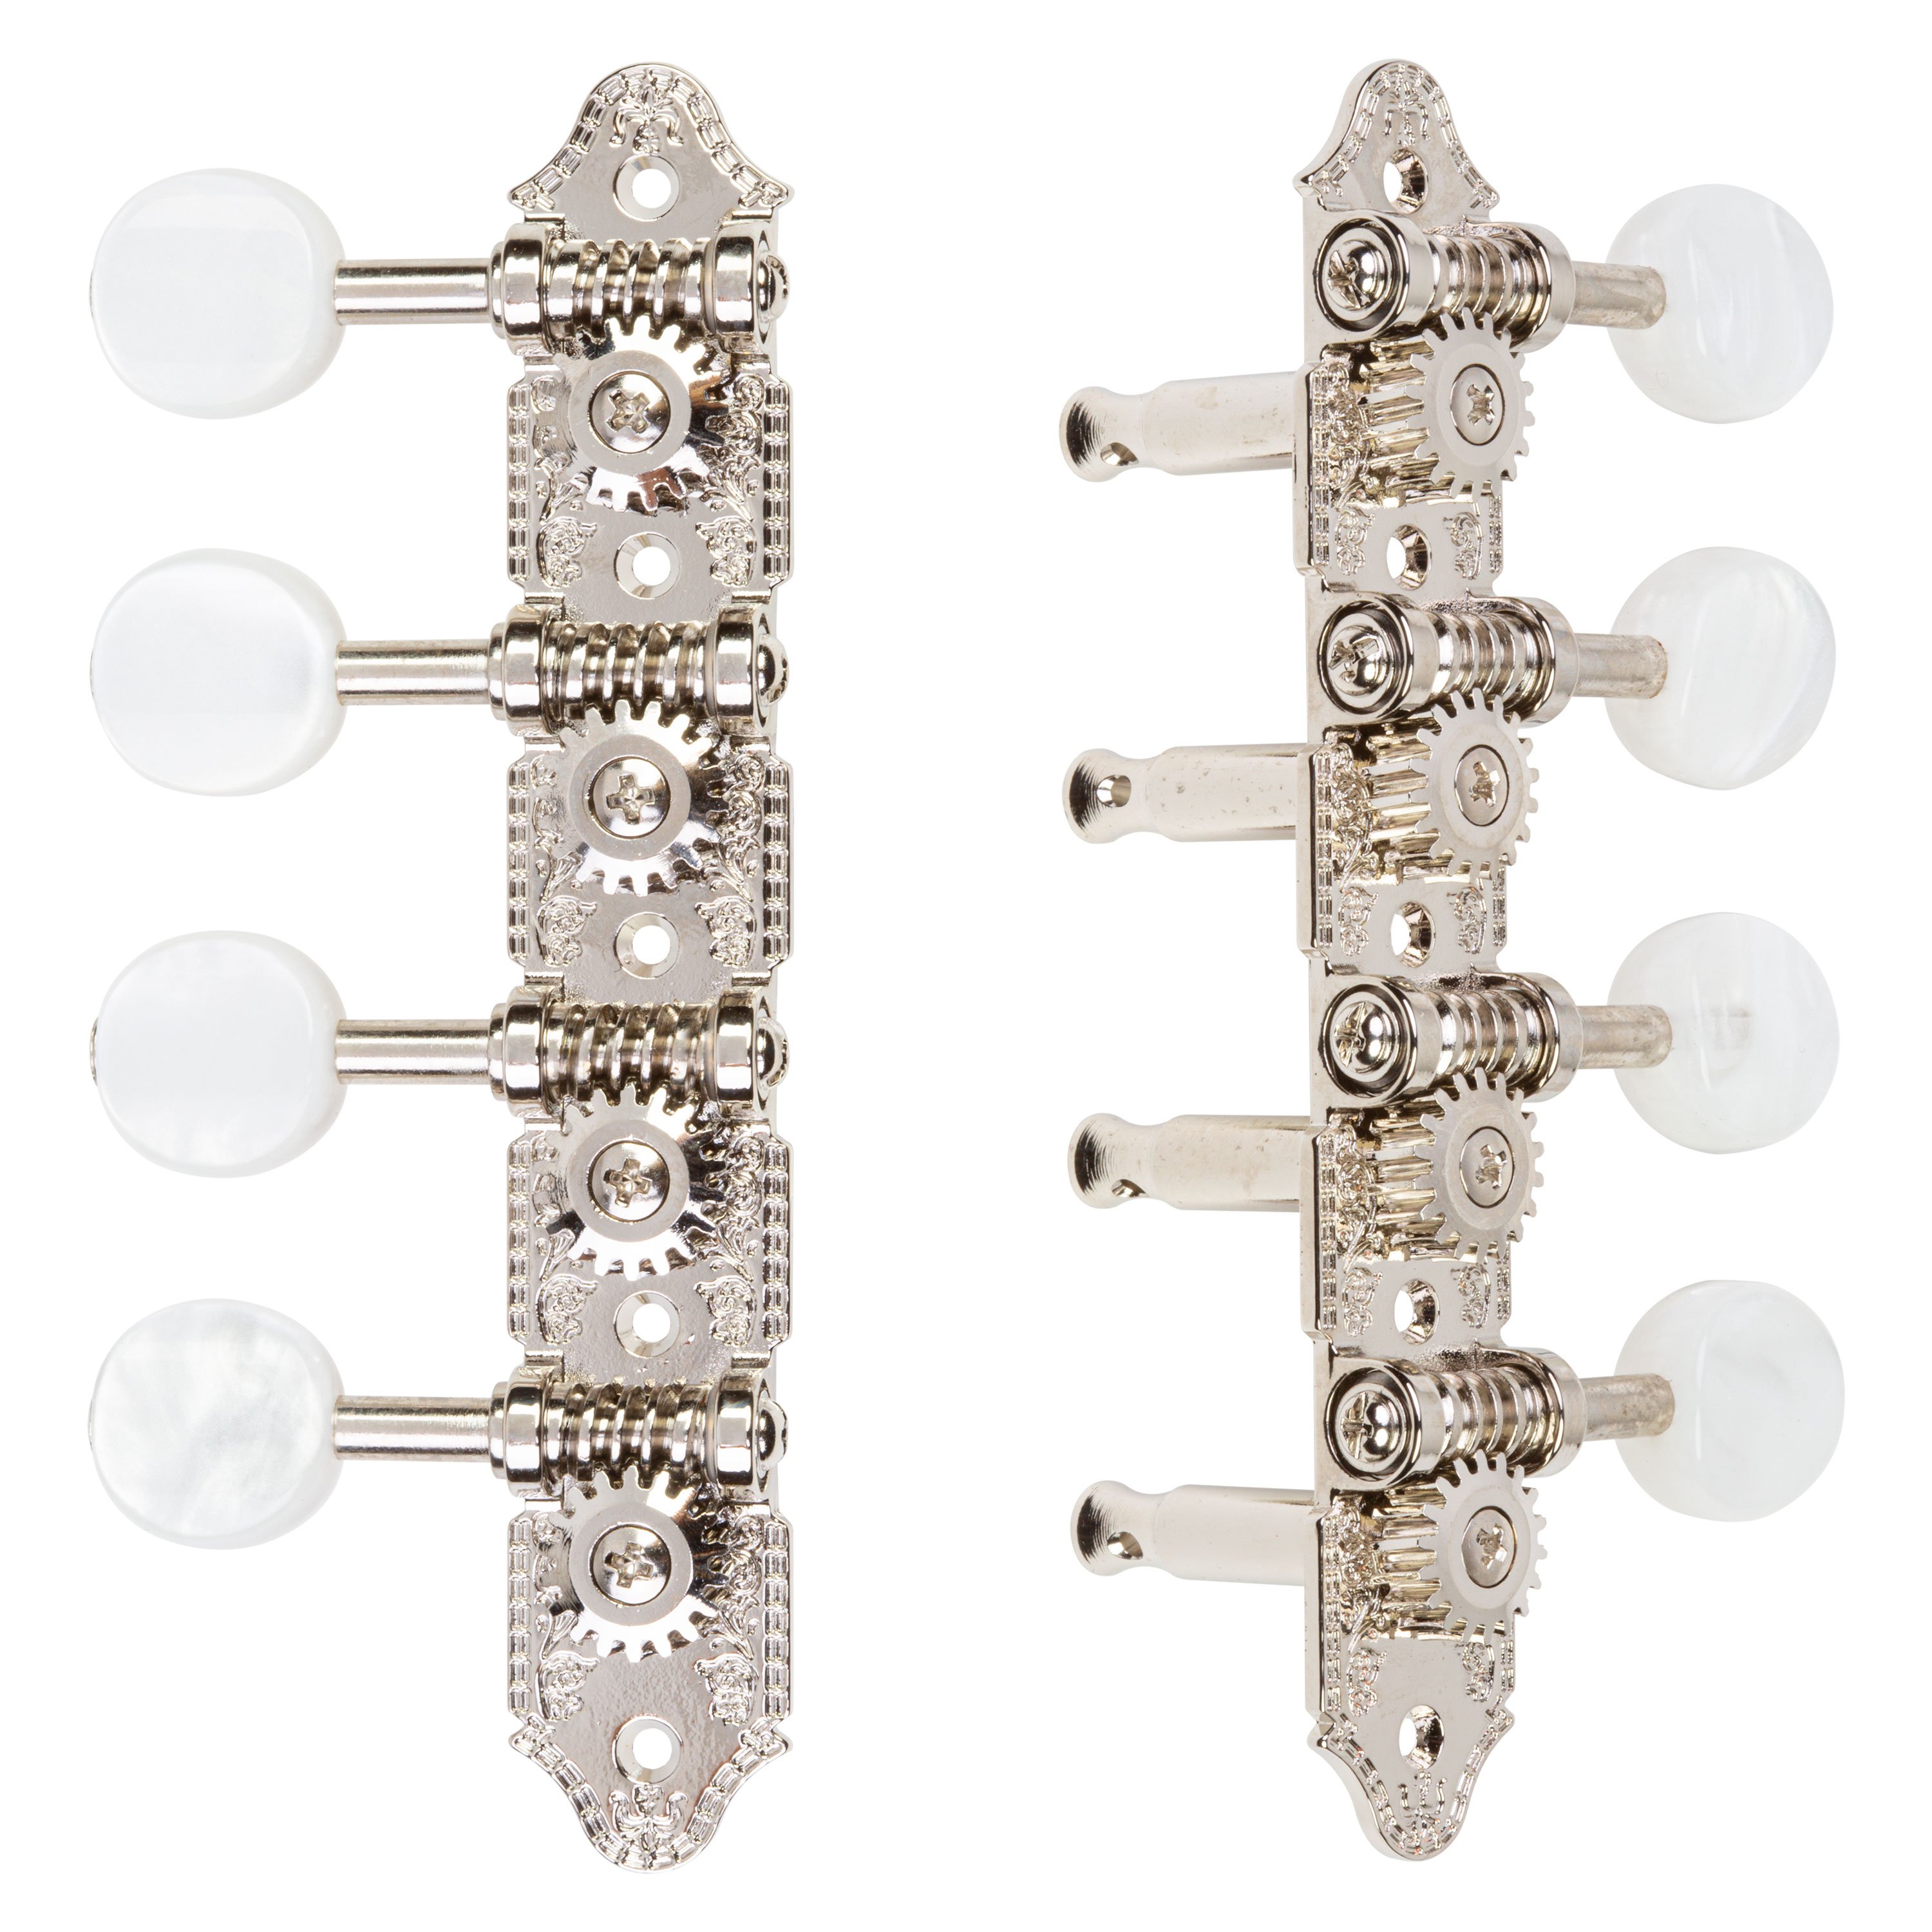 Grover A-Style 409 Mandolin Tuning Machines